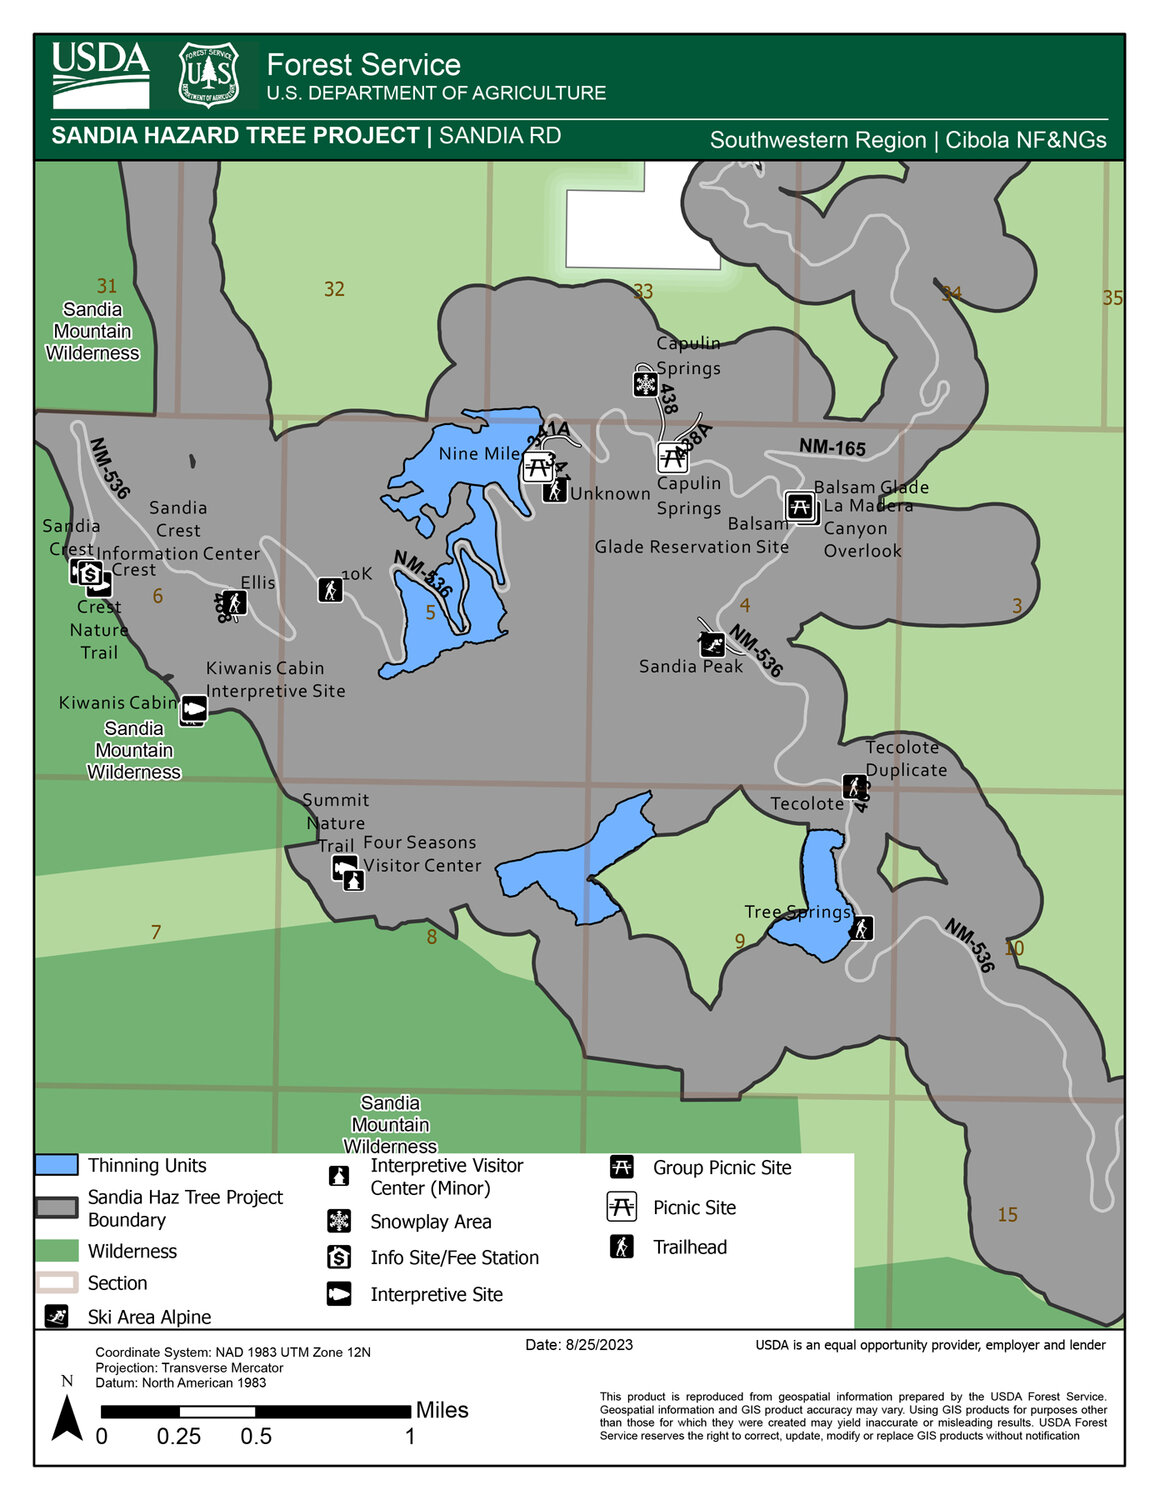 Areas of the Sandia Ranger District that will be undergoing the Sandia Hazard Tree and Thinning Maintenance project over the next six months.